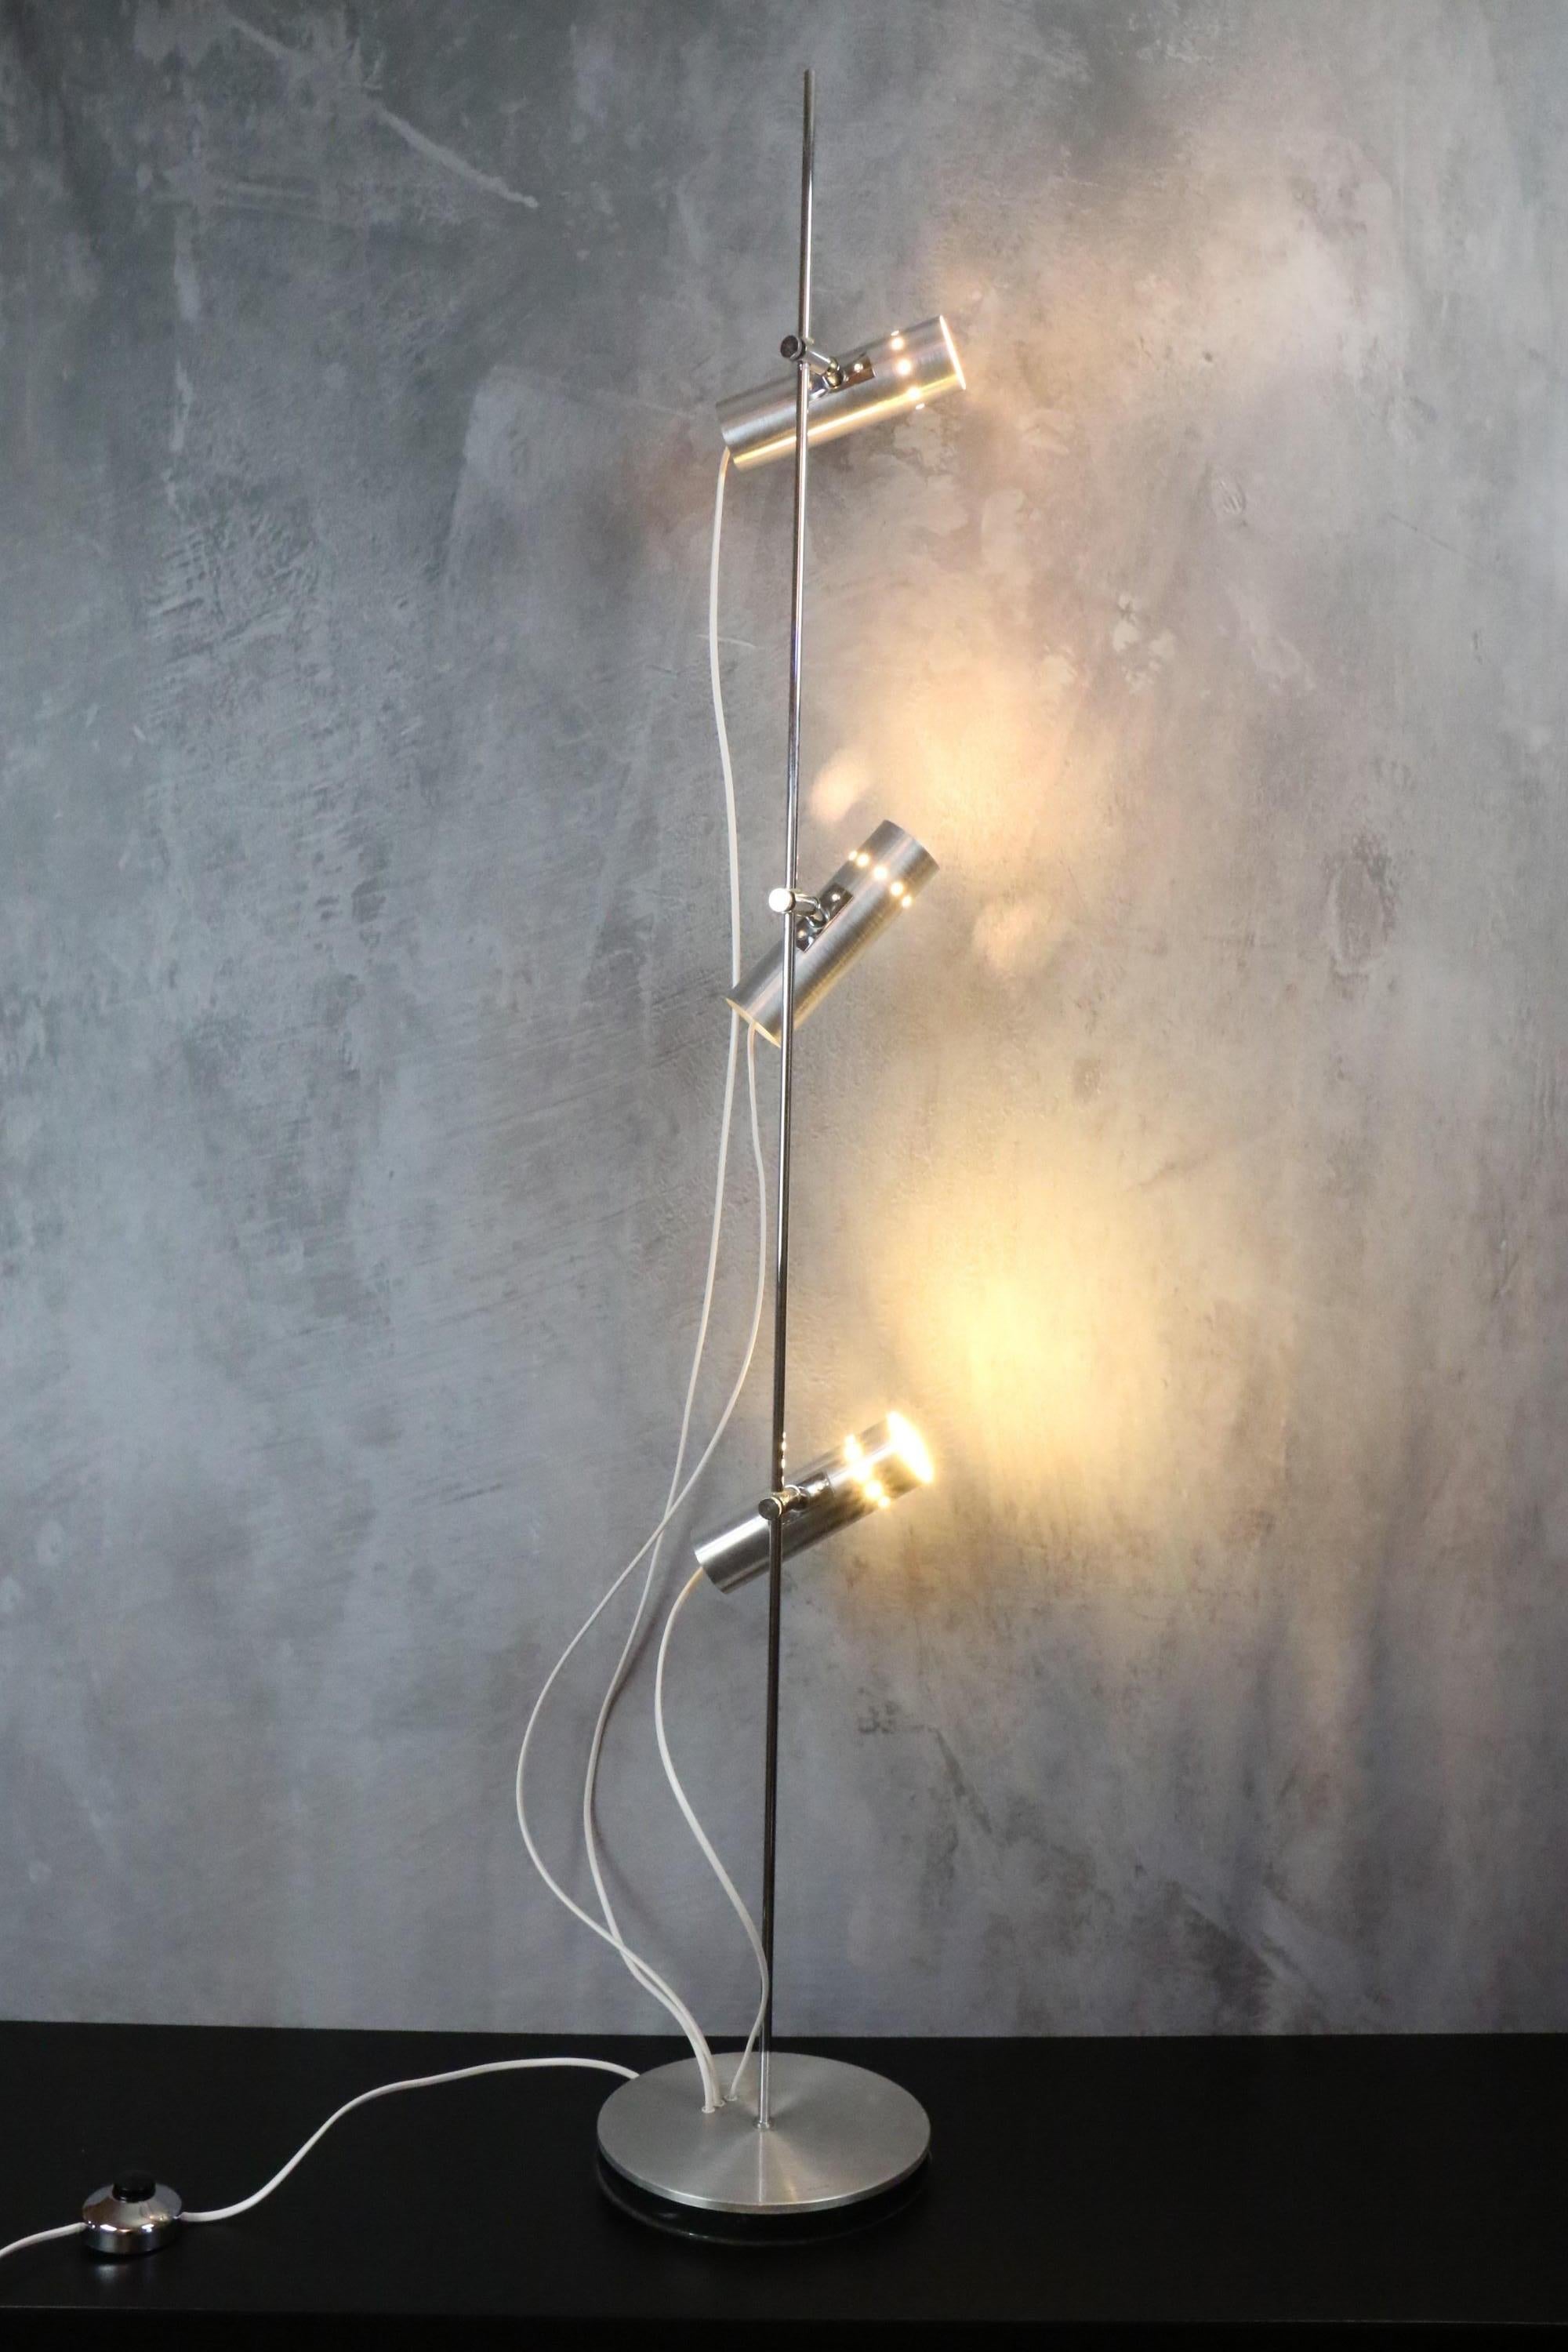 Alain Richard by Disderot midcentury floor lamp circa 1960 - Era Biny, Guariche

Iconic midcentury Minimalist floor lamp. Created by the French designer Alain Richard for Pierre Disderot.
The three spots are adjustable in many positions. The